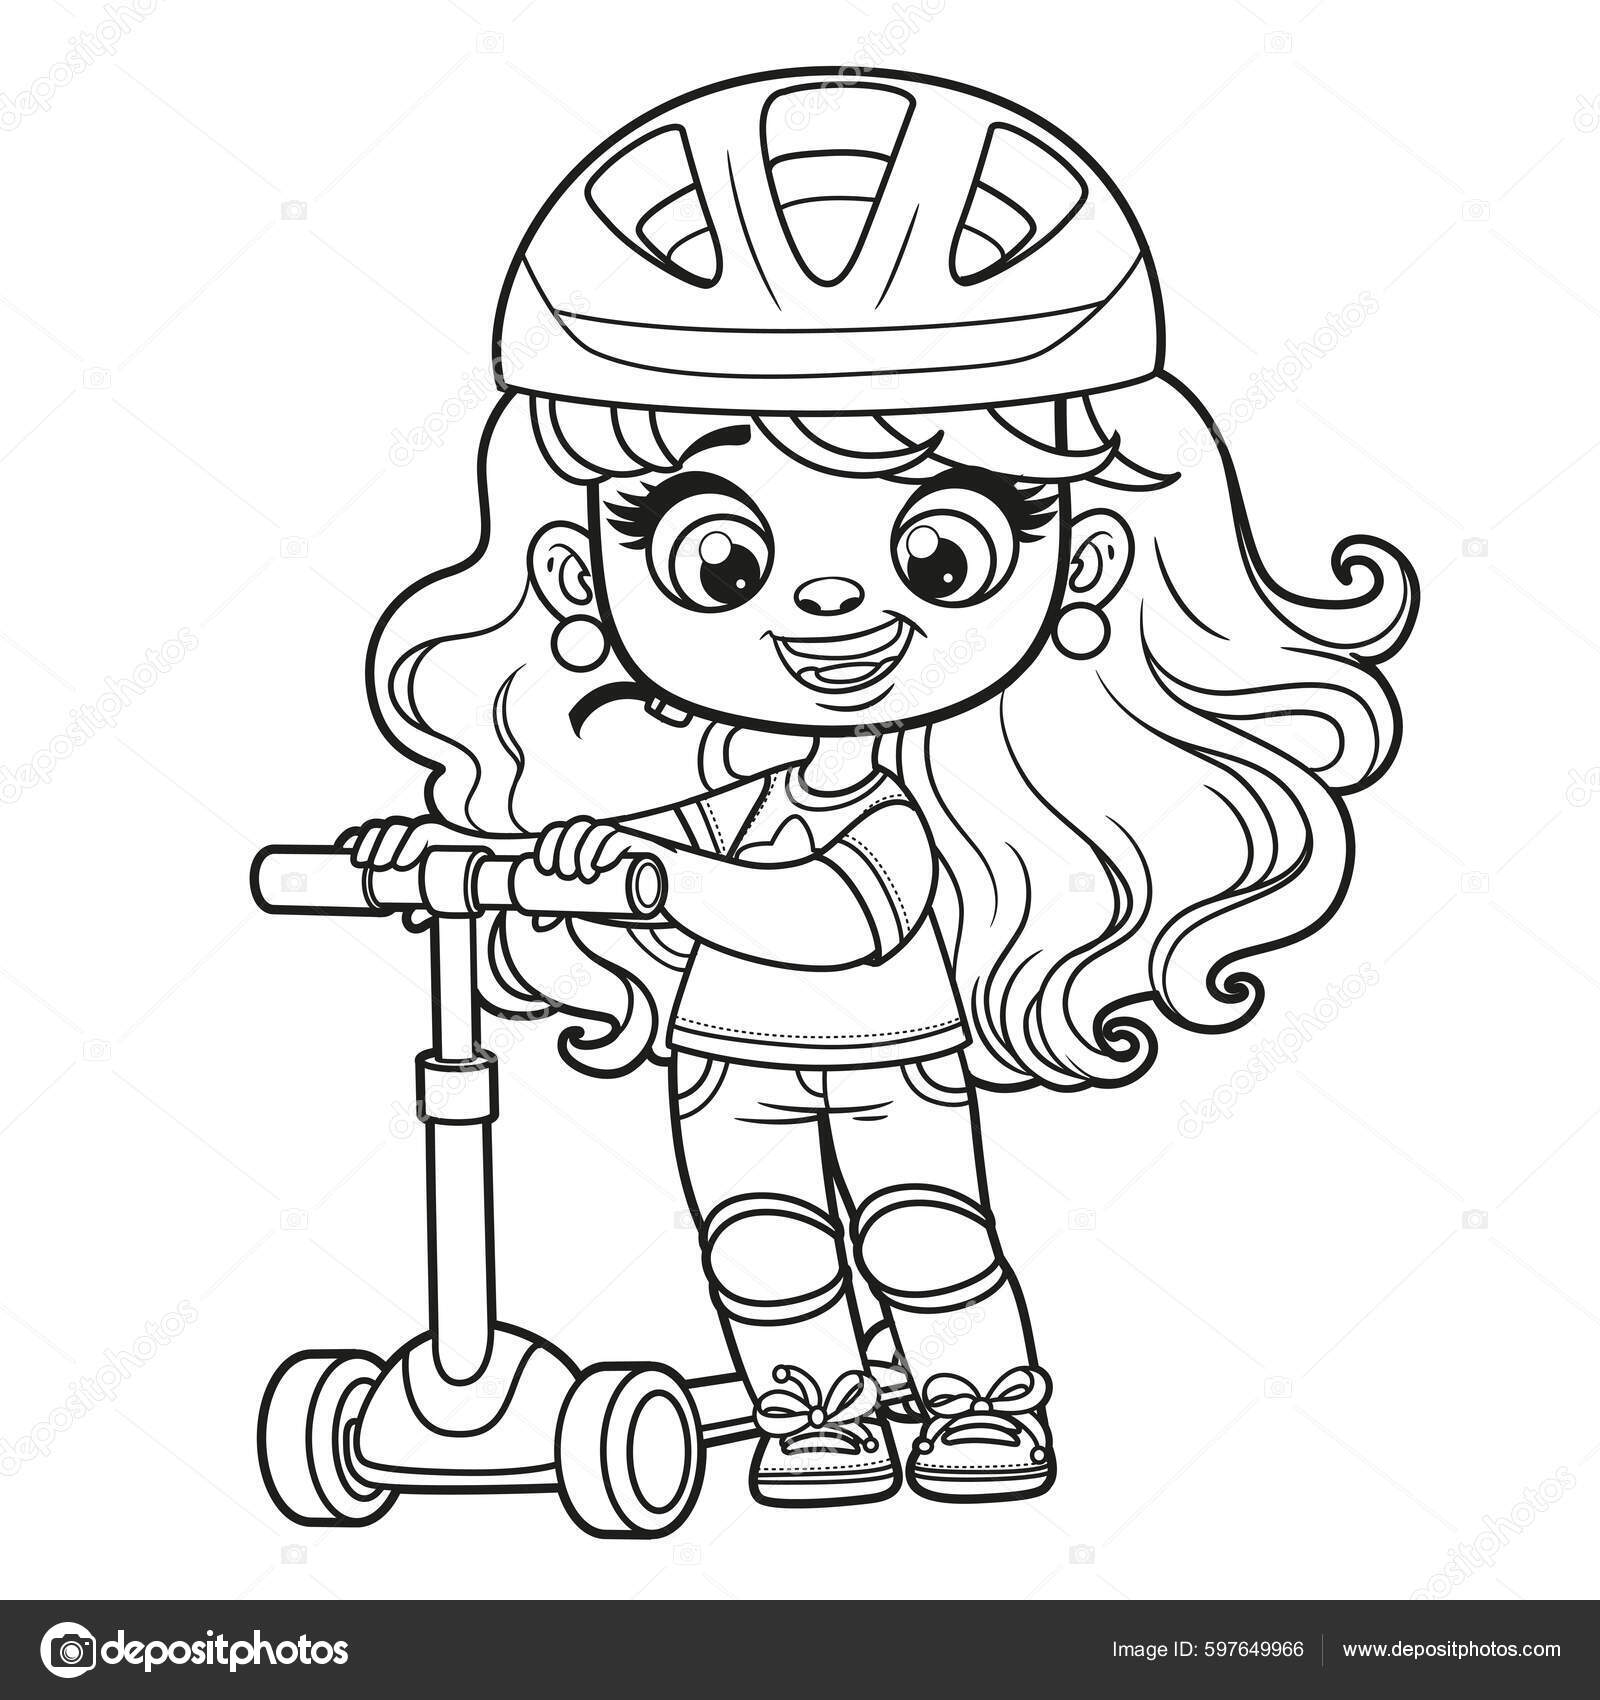 Cute cartoon girl helmet scooter outlined coloring page white background stock vector by yadviga